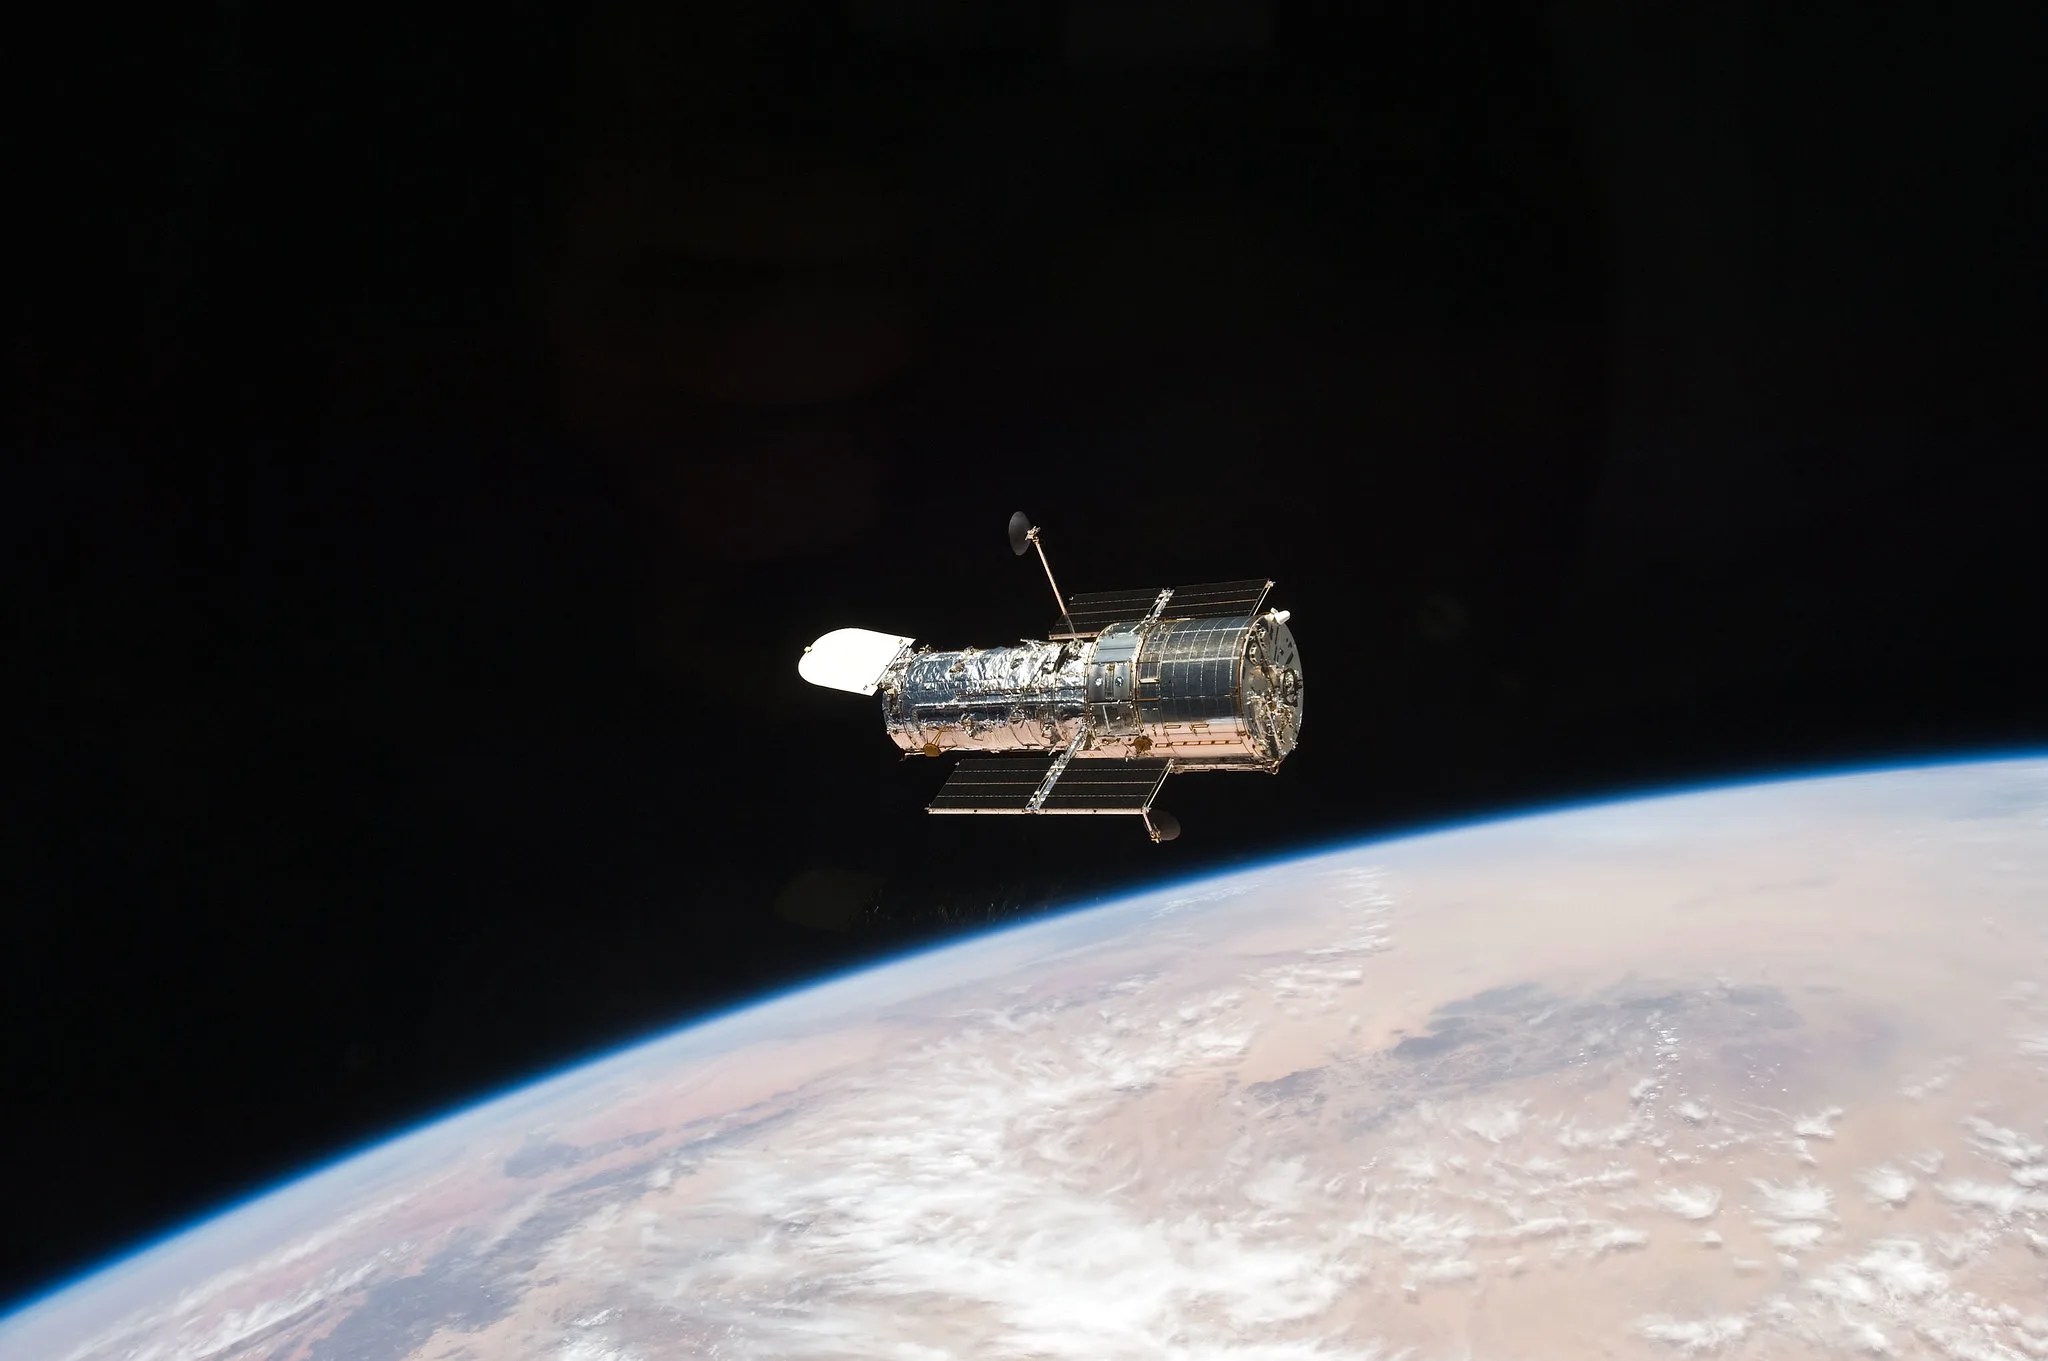 Photograph of Hubble orbiting the Earth